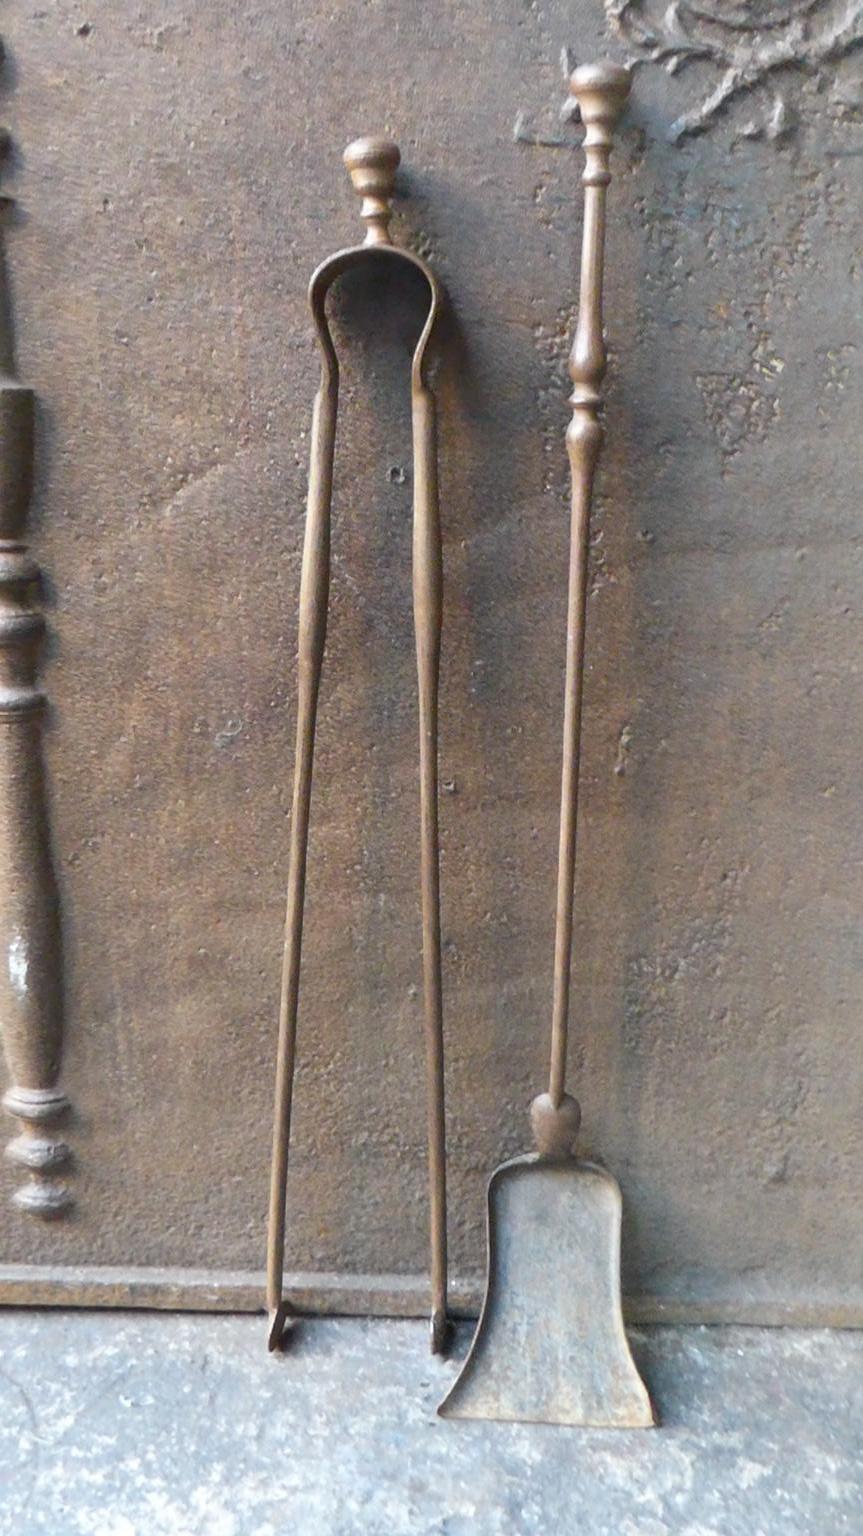 19th century French Napoleon III fireplace tool set consisting of fireplace tongs and a shovel. The fire irons are made of wrought iron. They are in a good condition and are fully functional.